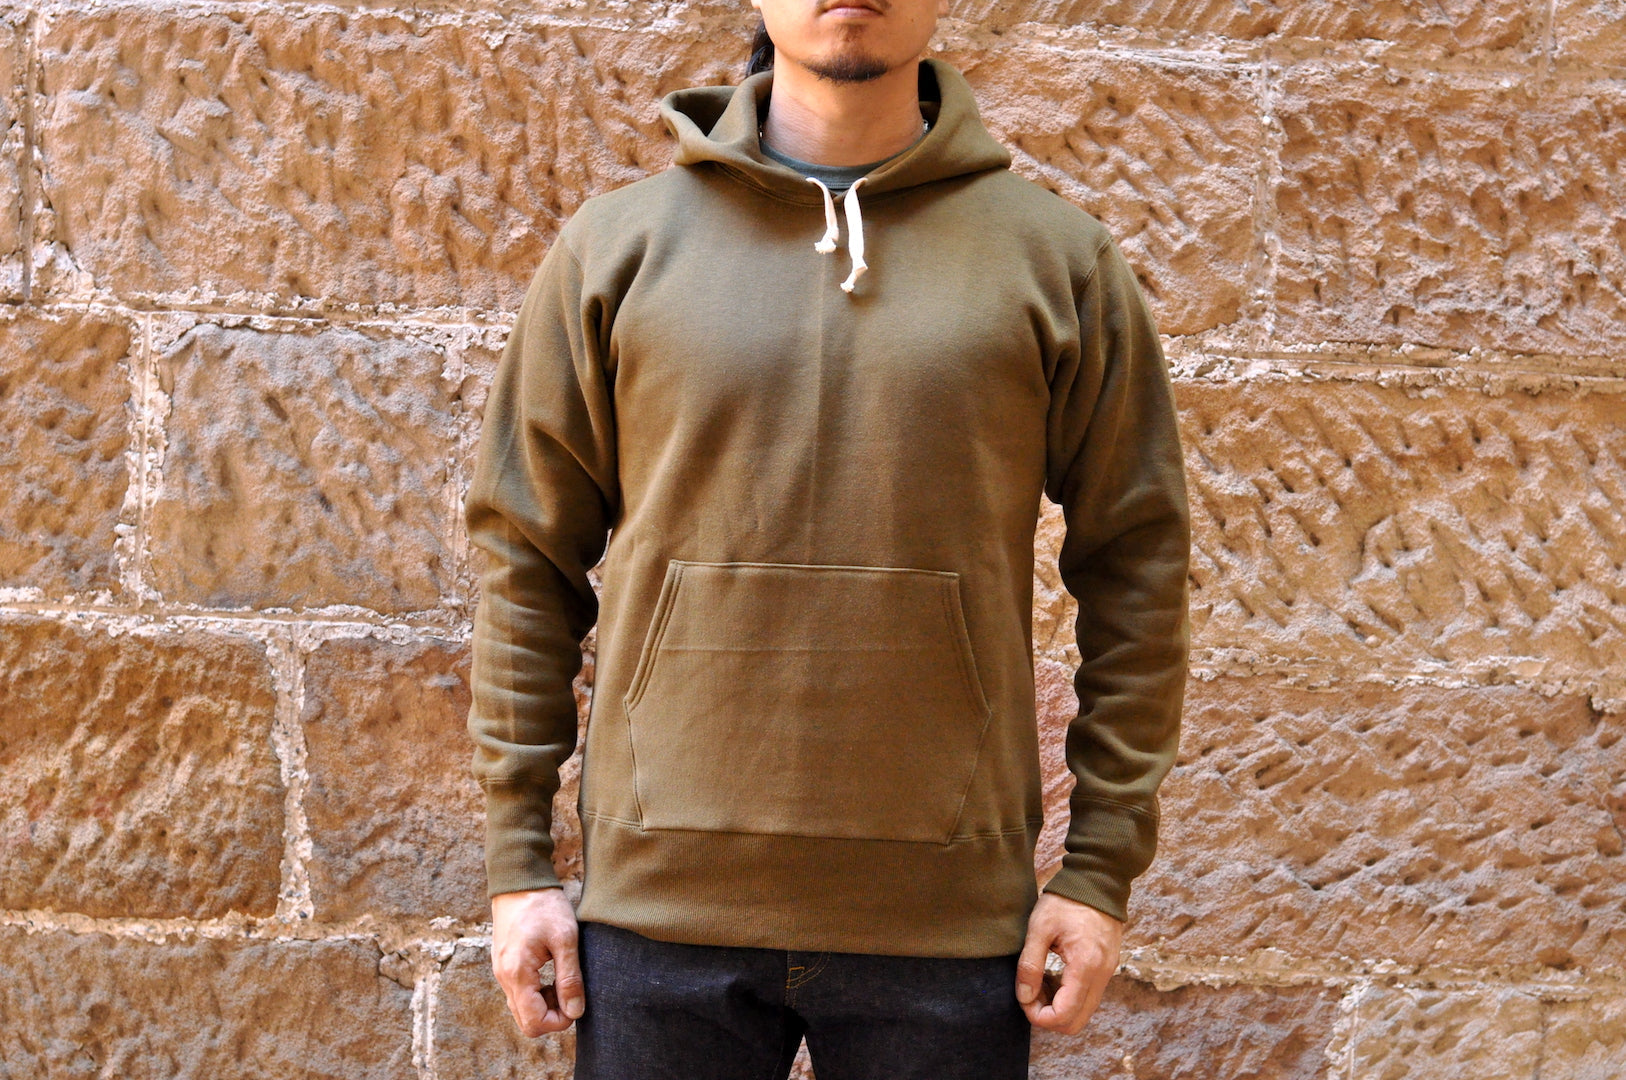 The Strike Gold x CORLECTION 12oz Loopwheeled Pull Over (Vintage Olive)